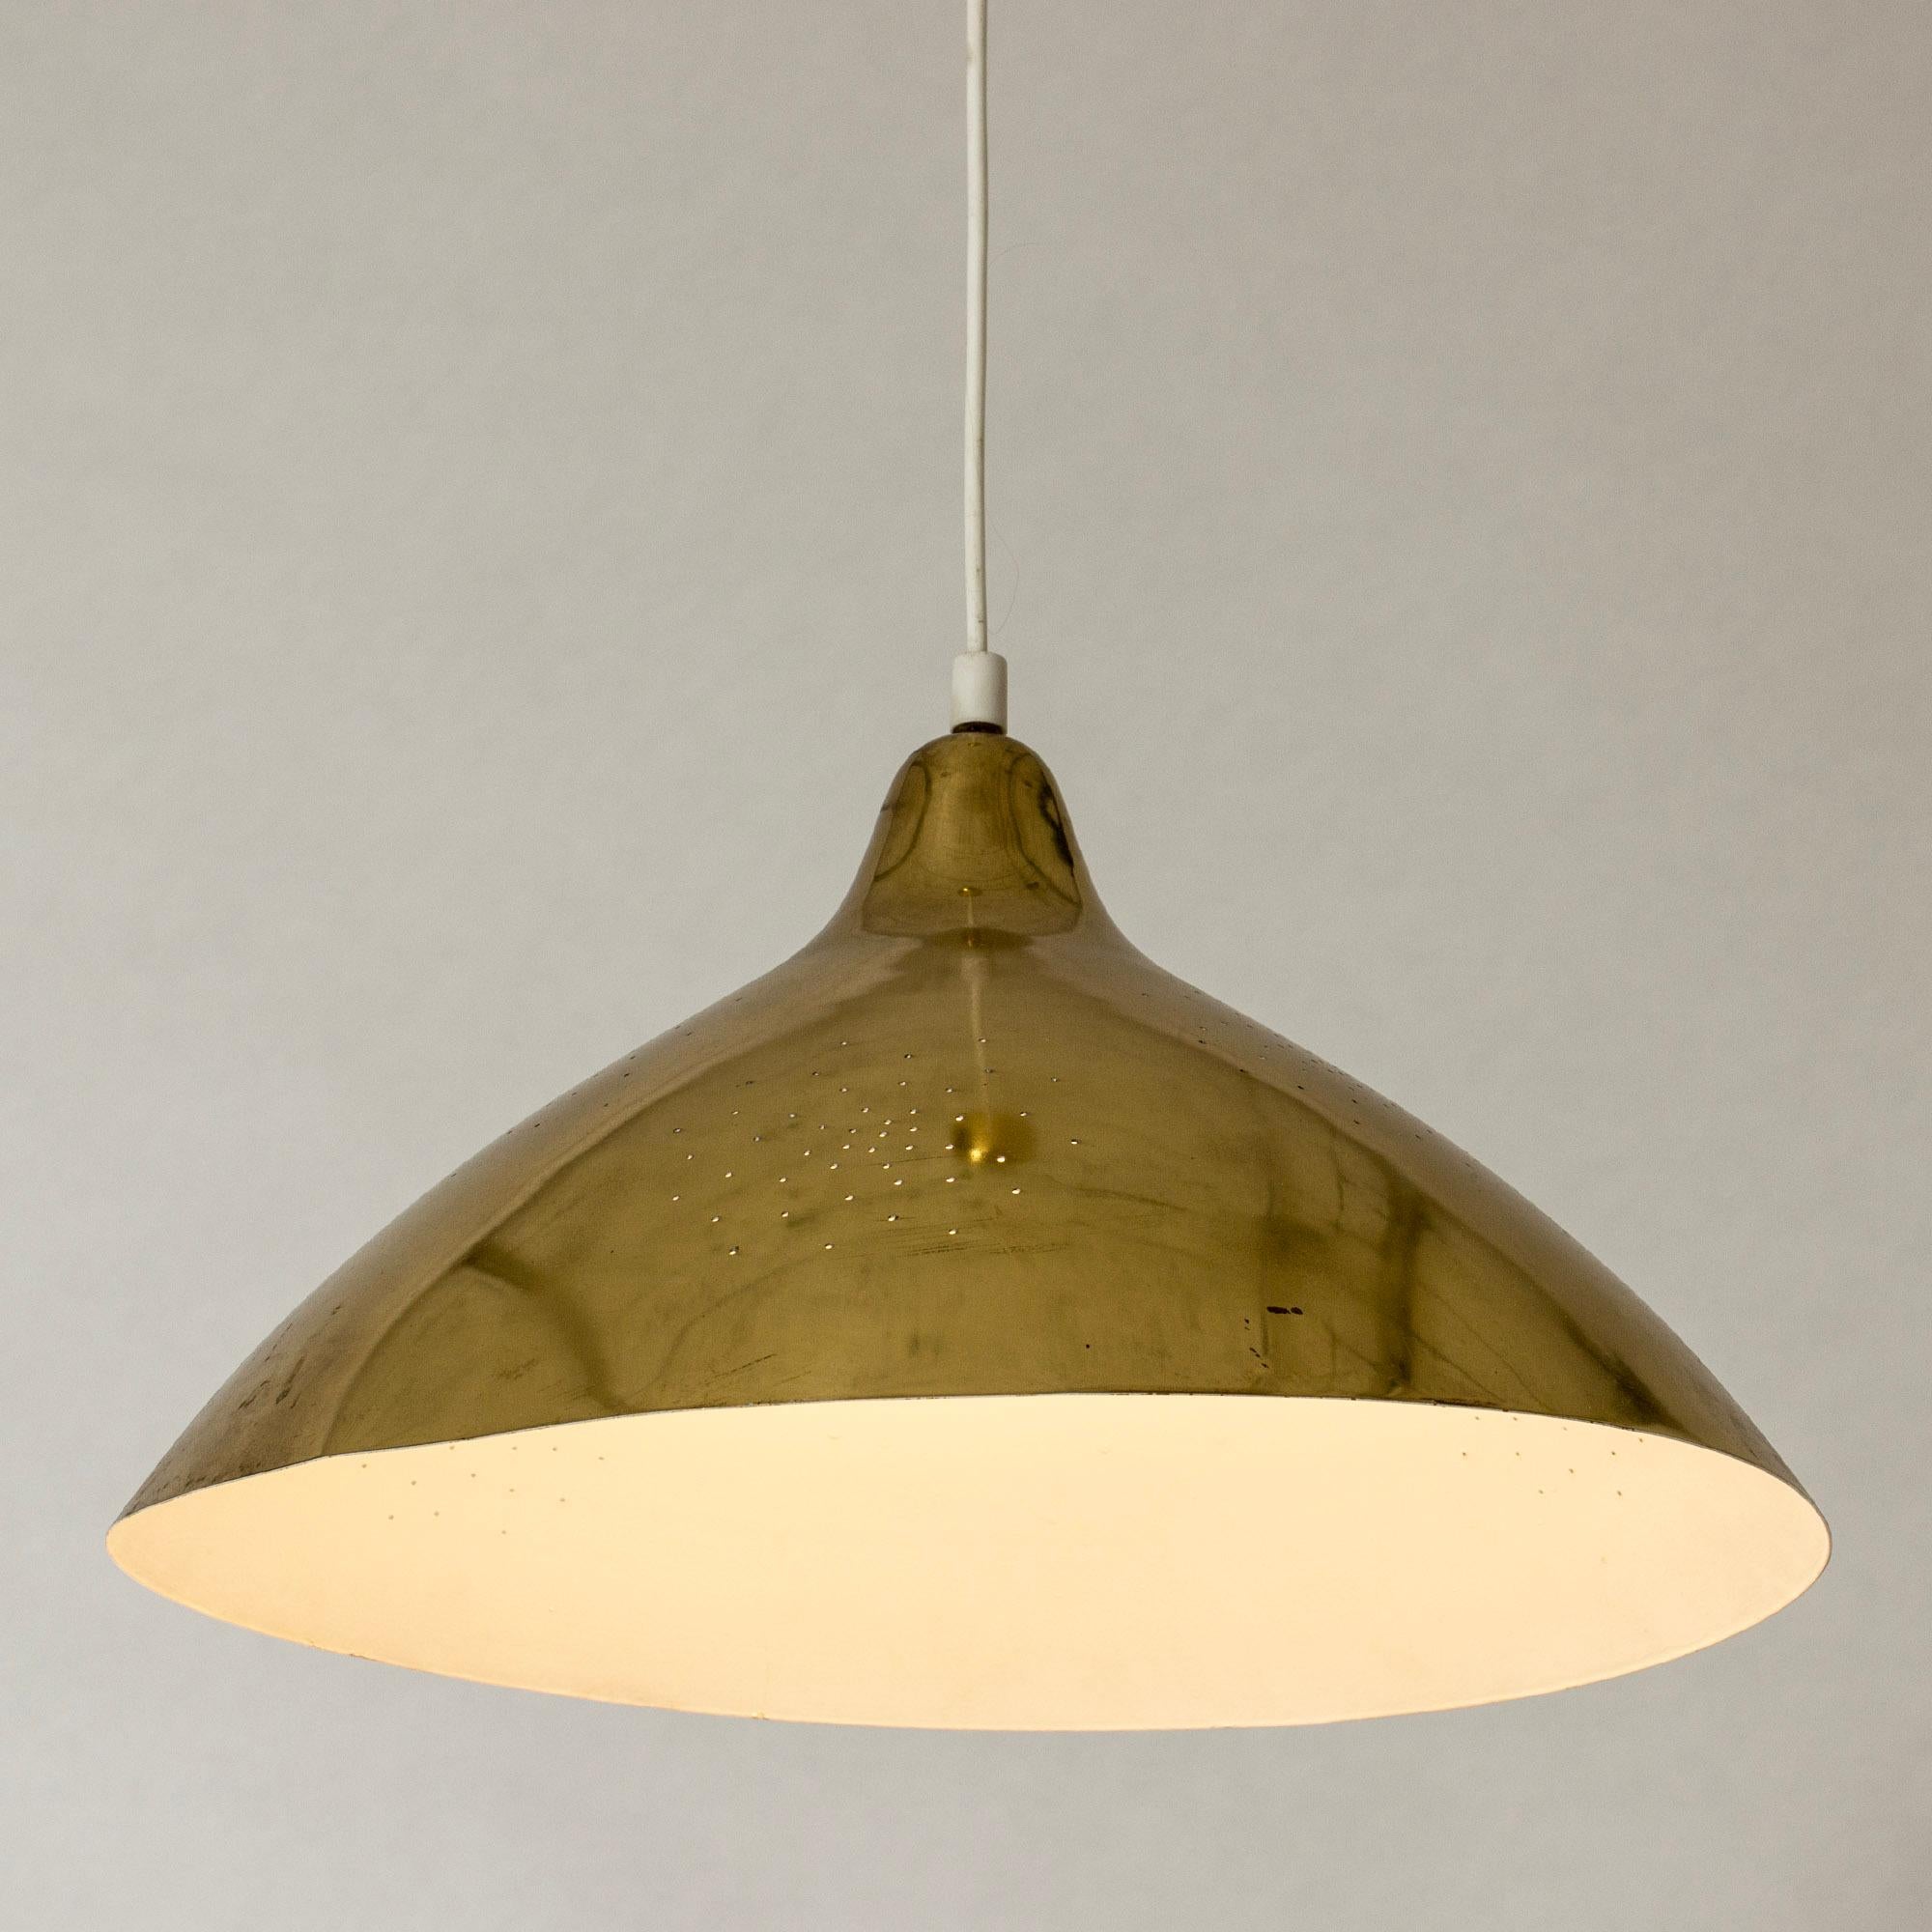 Midcentury Brass Pendant Lamp by Lisa Johansson-Pape, Orno, Finland, 1950s In Good Condition For Sale In Stockholm, SE